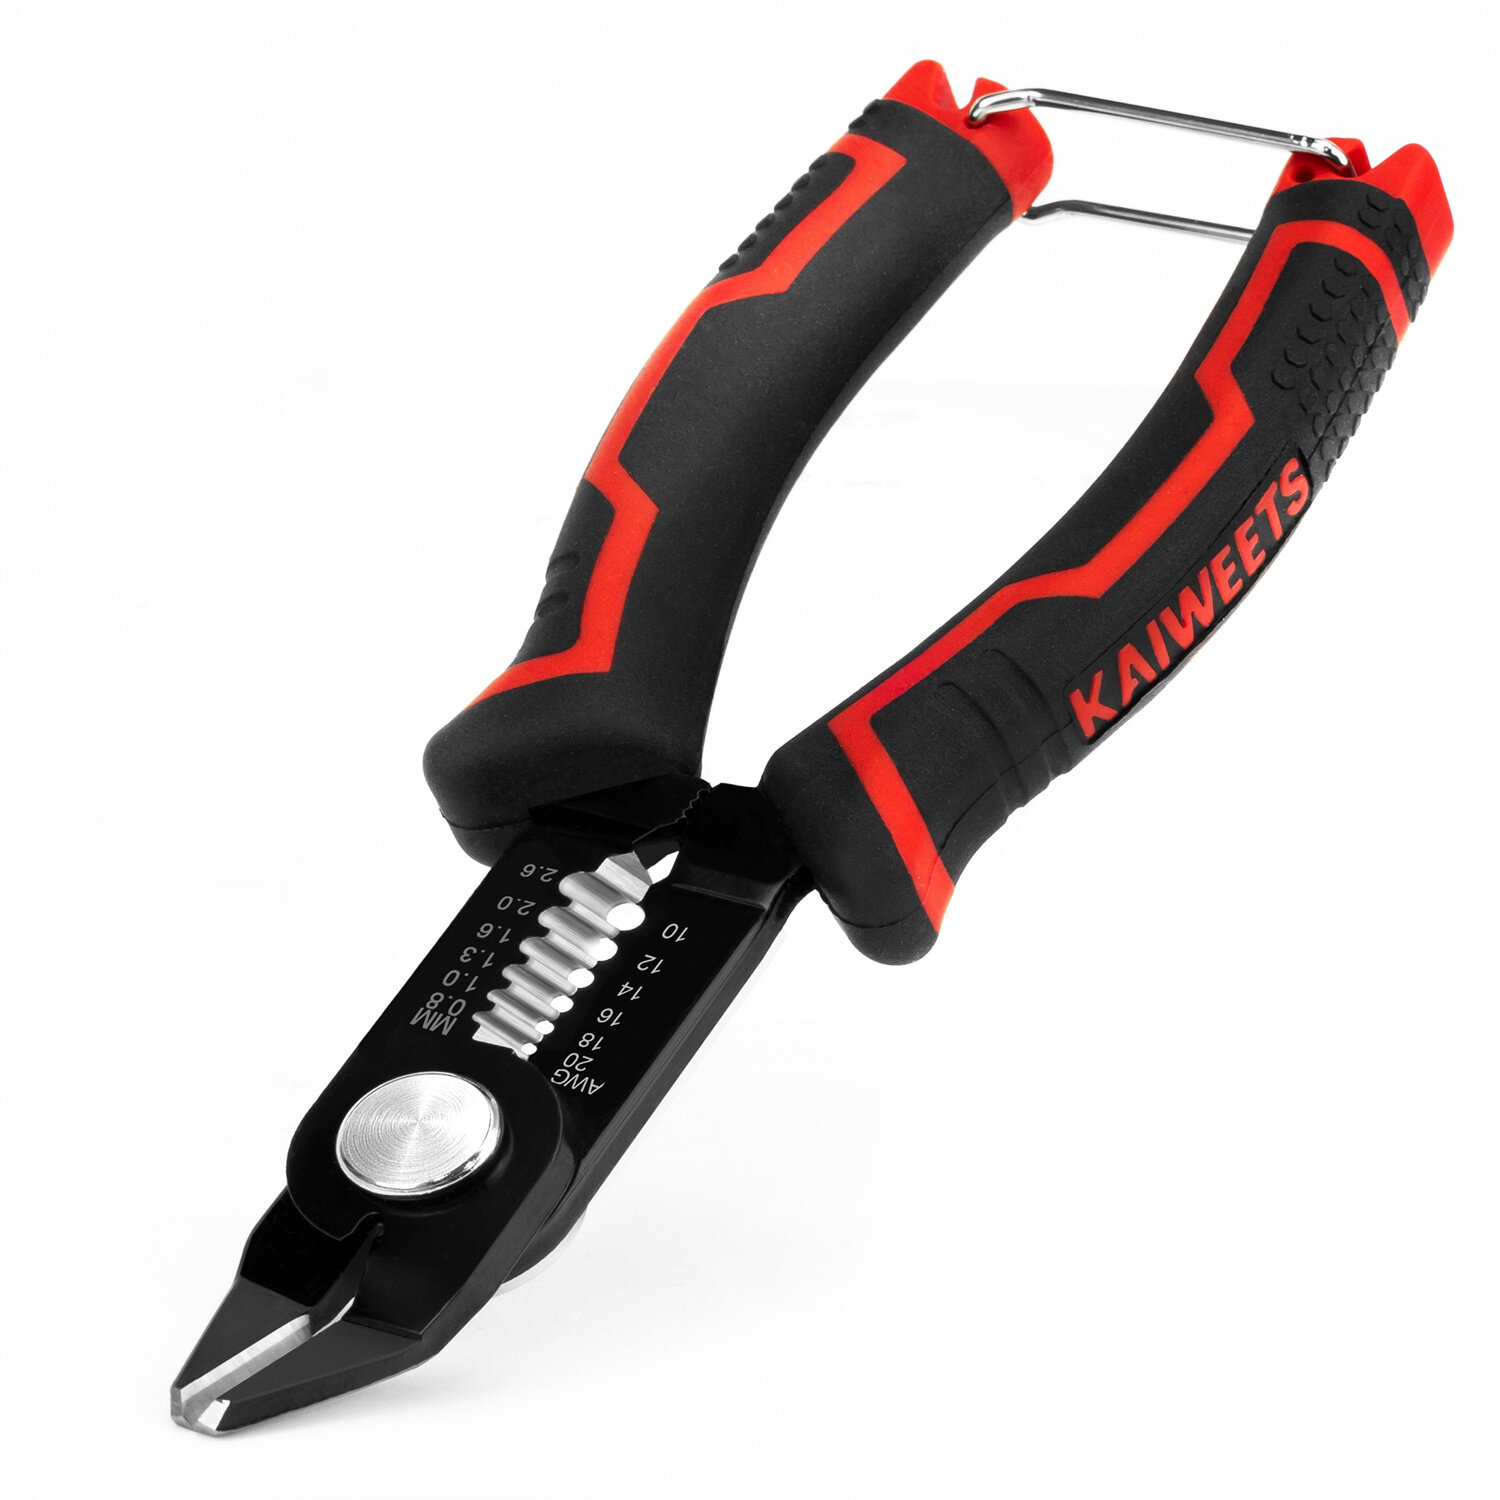 

[EU Direct]KAIWEETS KWS-112 2 in 1 Wire Cutter Stripper Durable 65Mn Steel Ergonomic PVC Handle 10-20 AWG Wire Size Perf